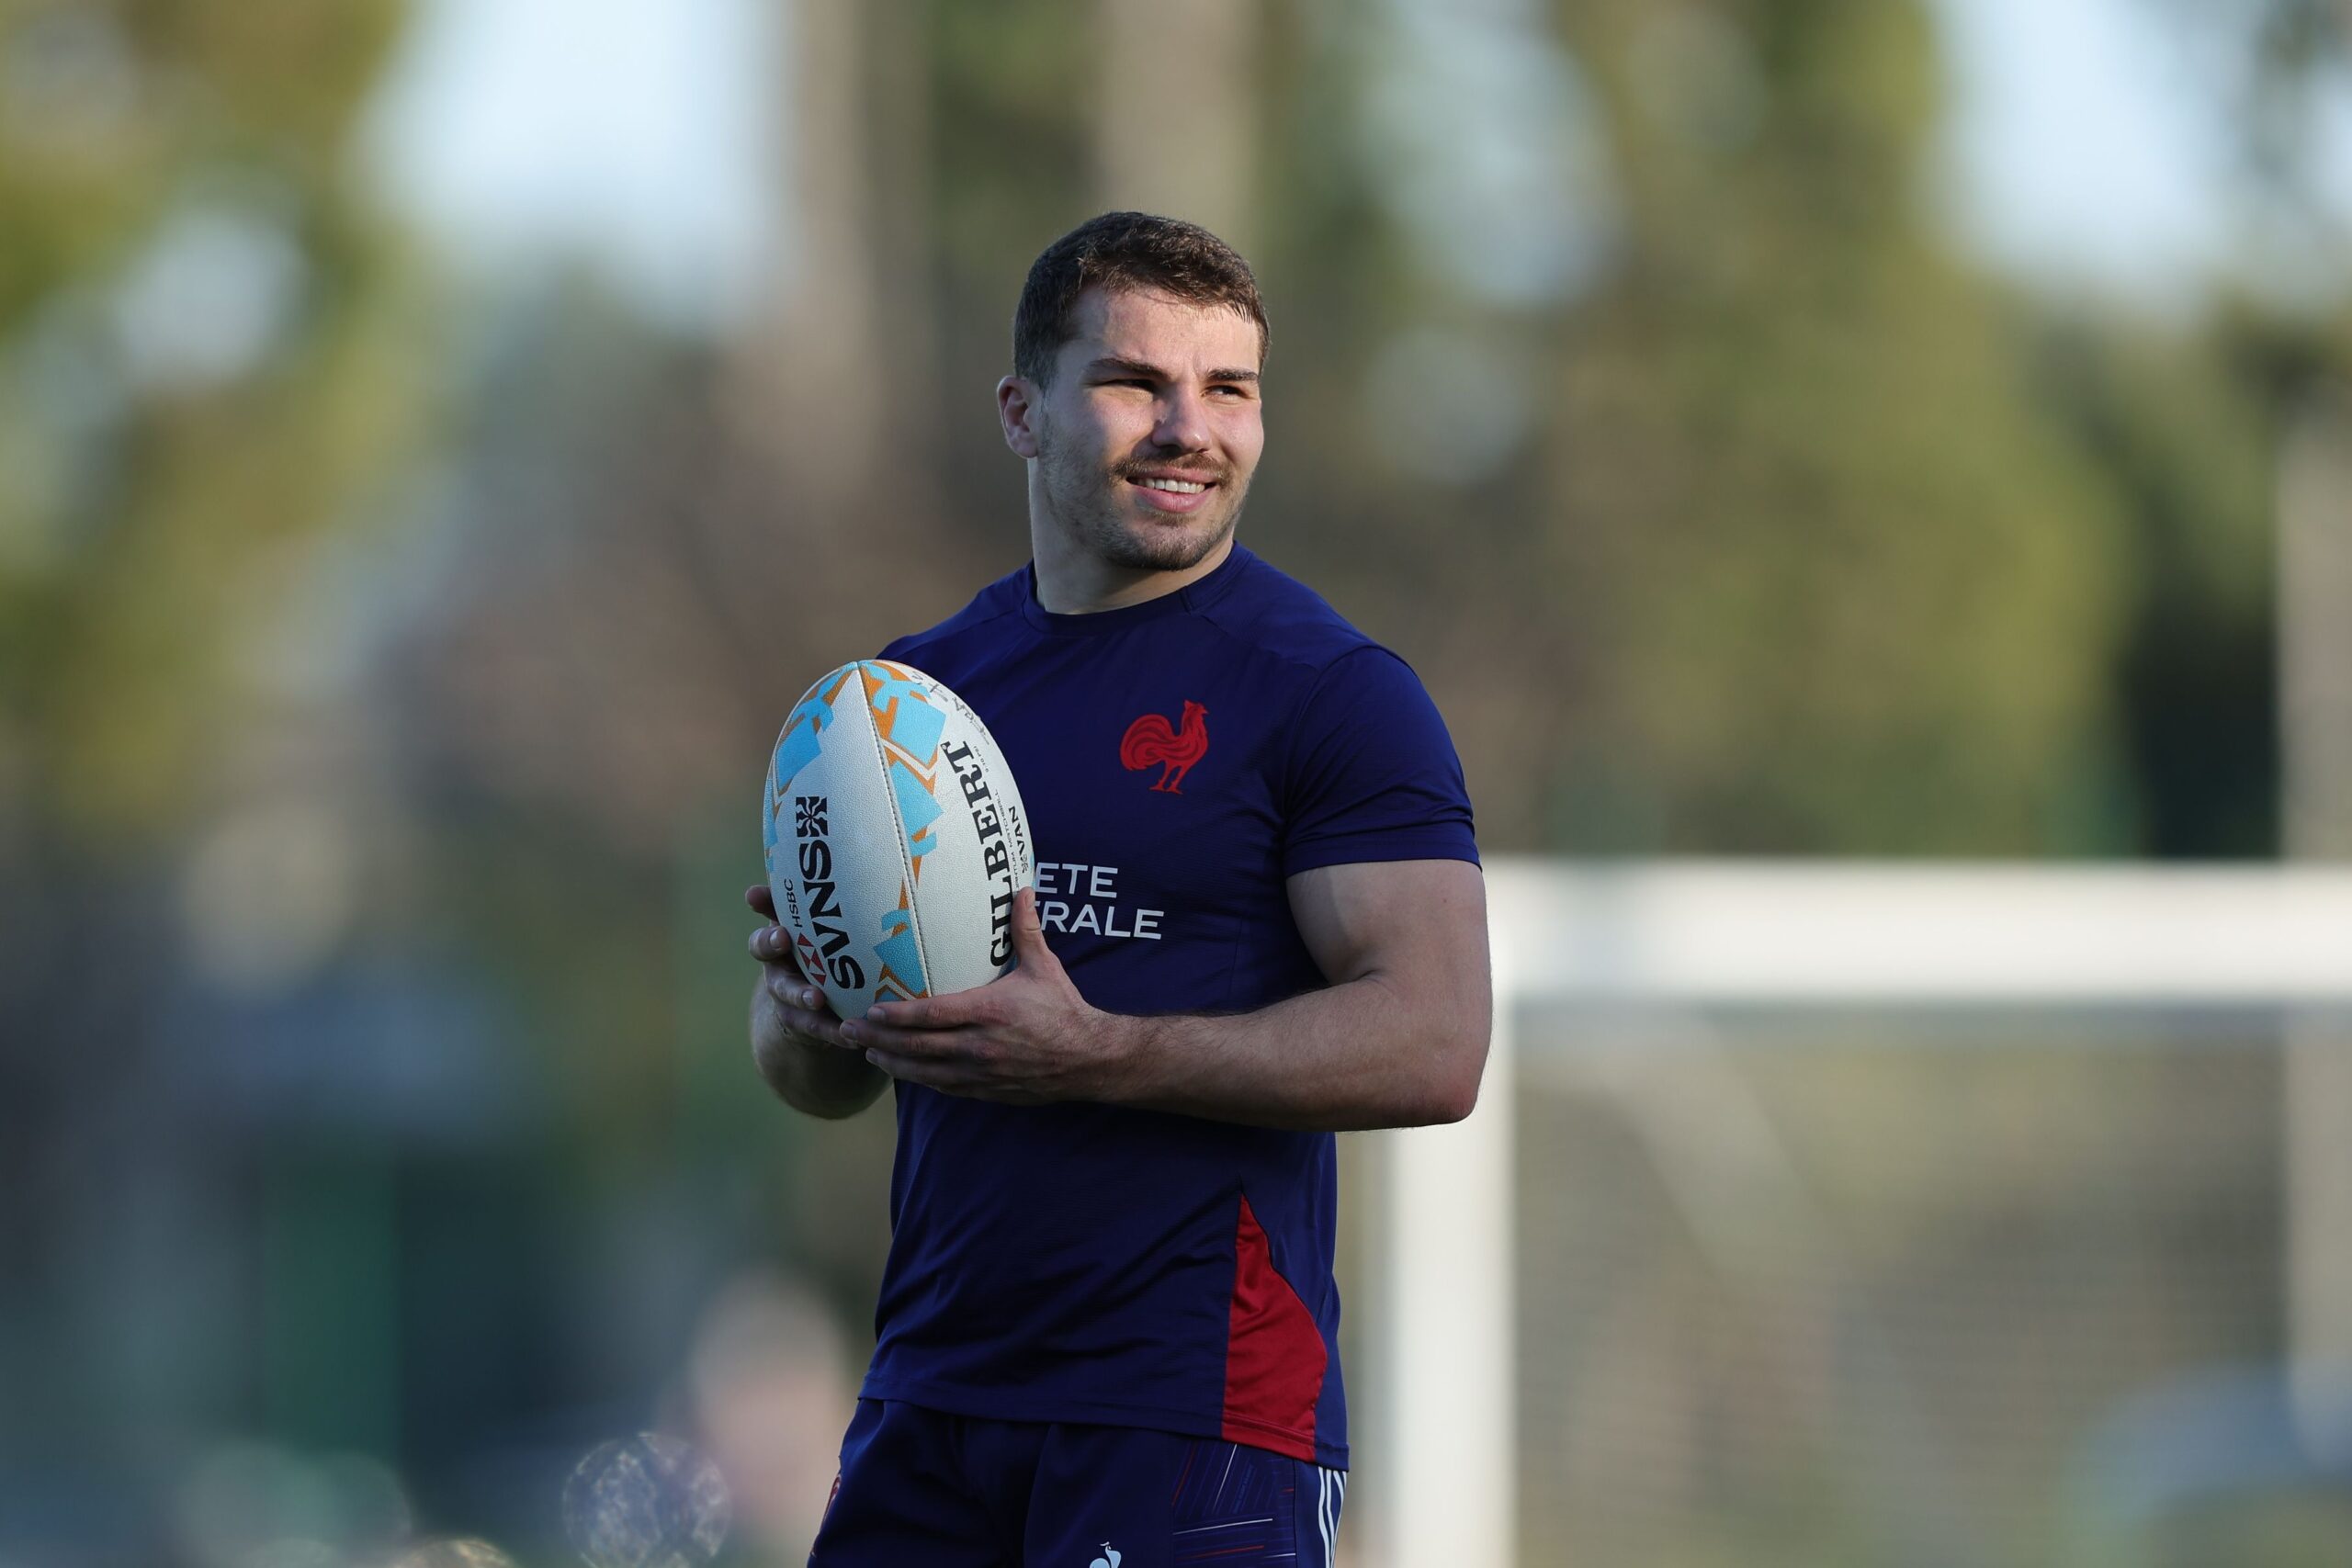 France training session prior to the HSBC SVNS at Toyota Sports Park on 28 February, 2024 in Los Angeles, United States